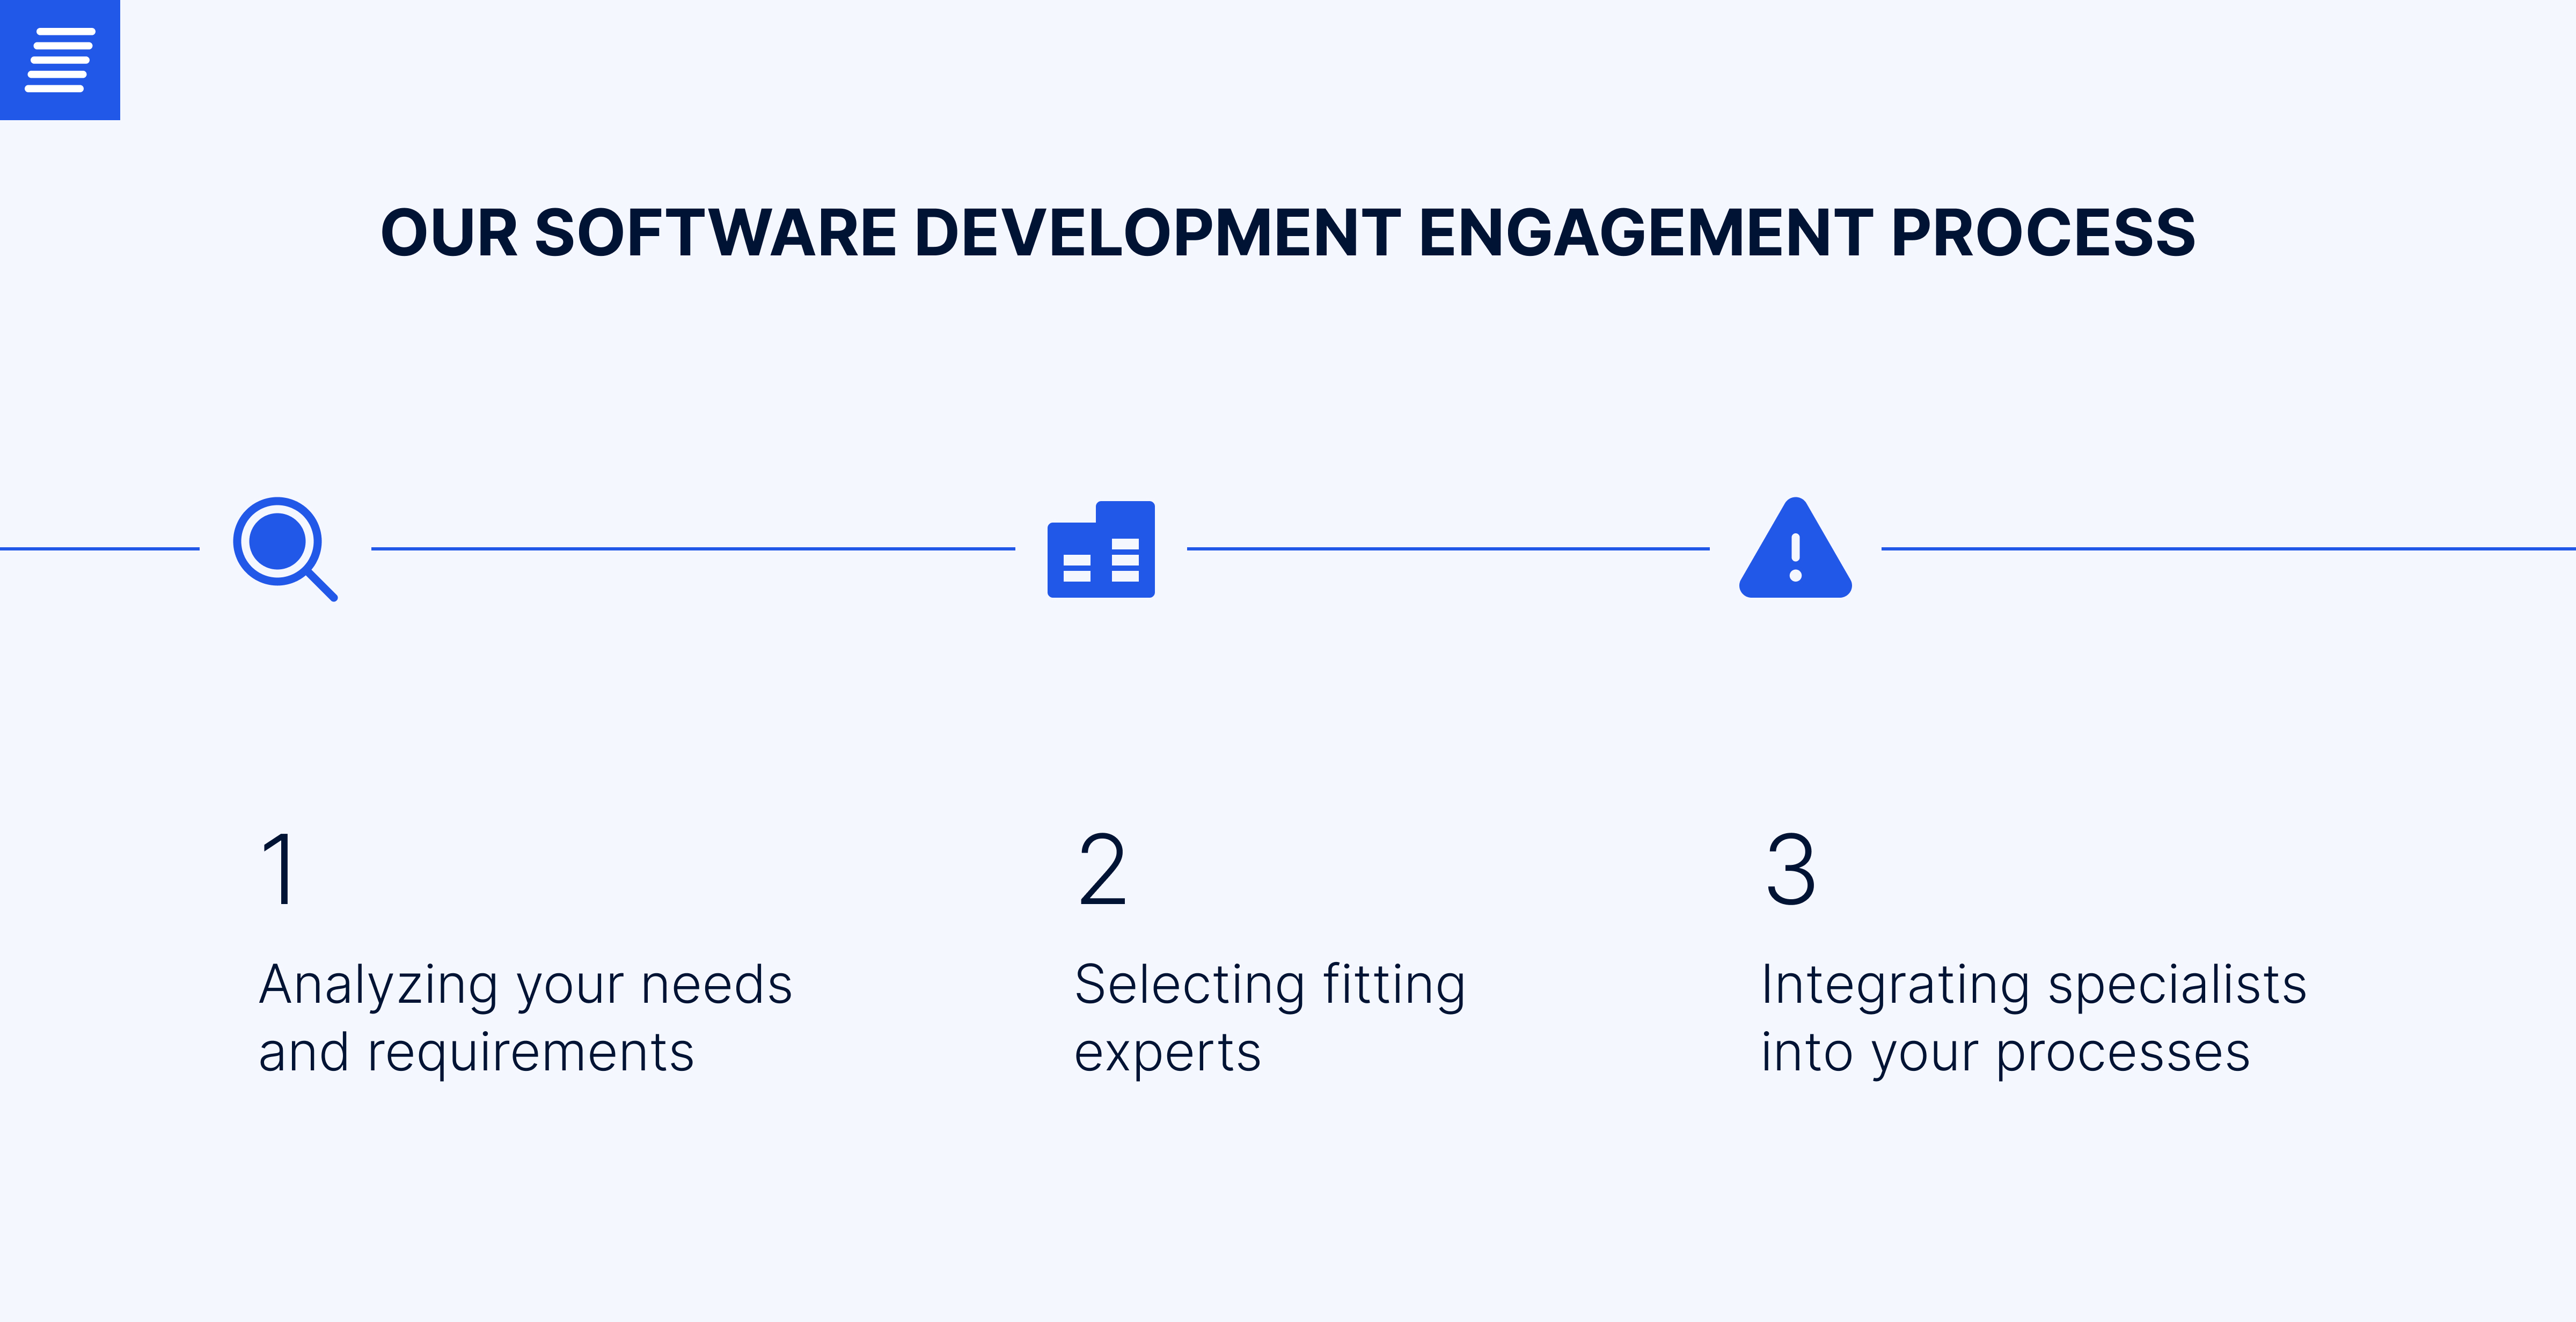 stages of the IT engagement model